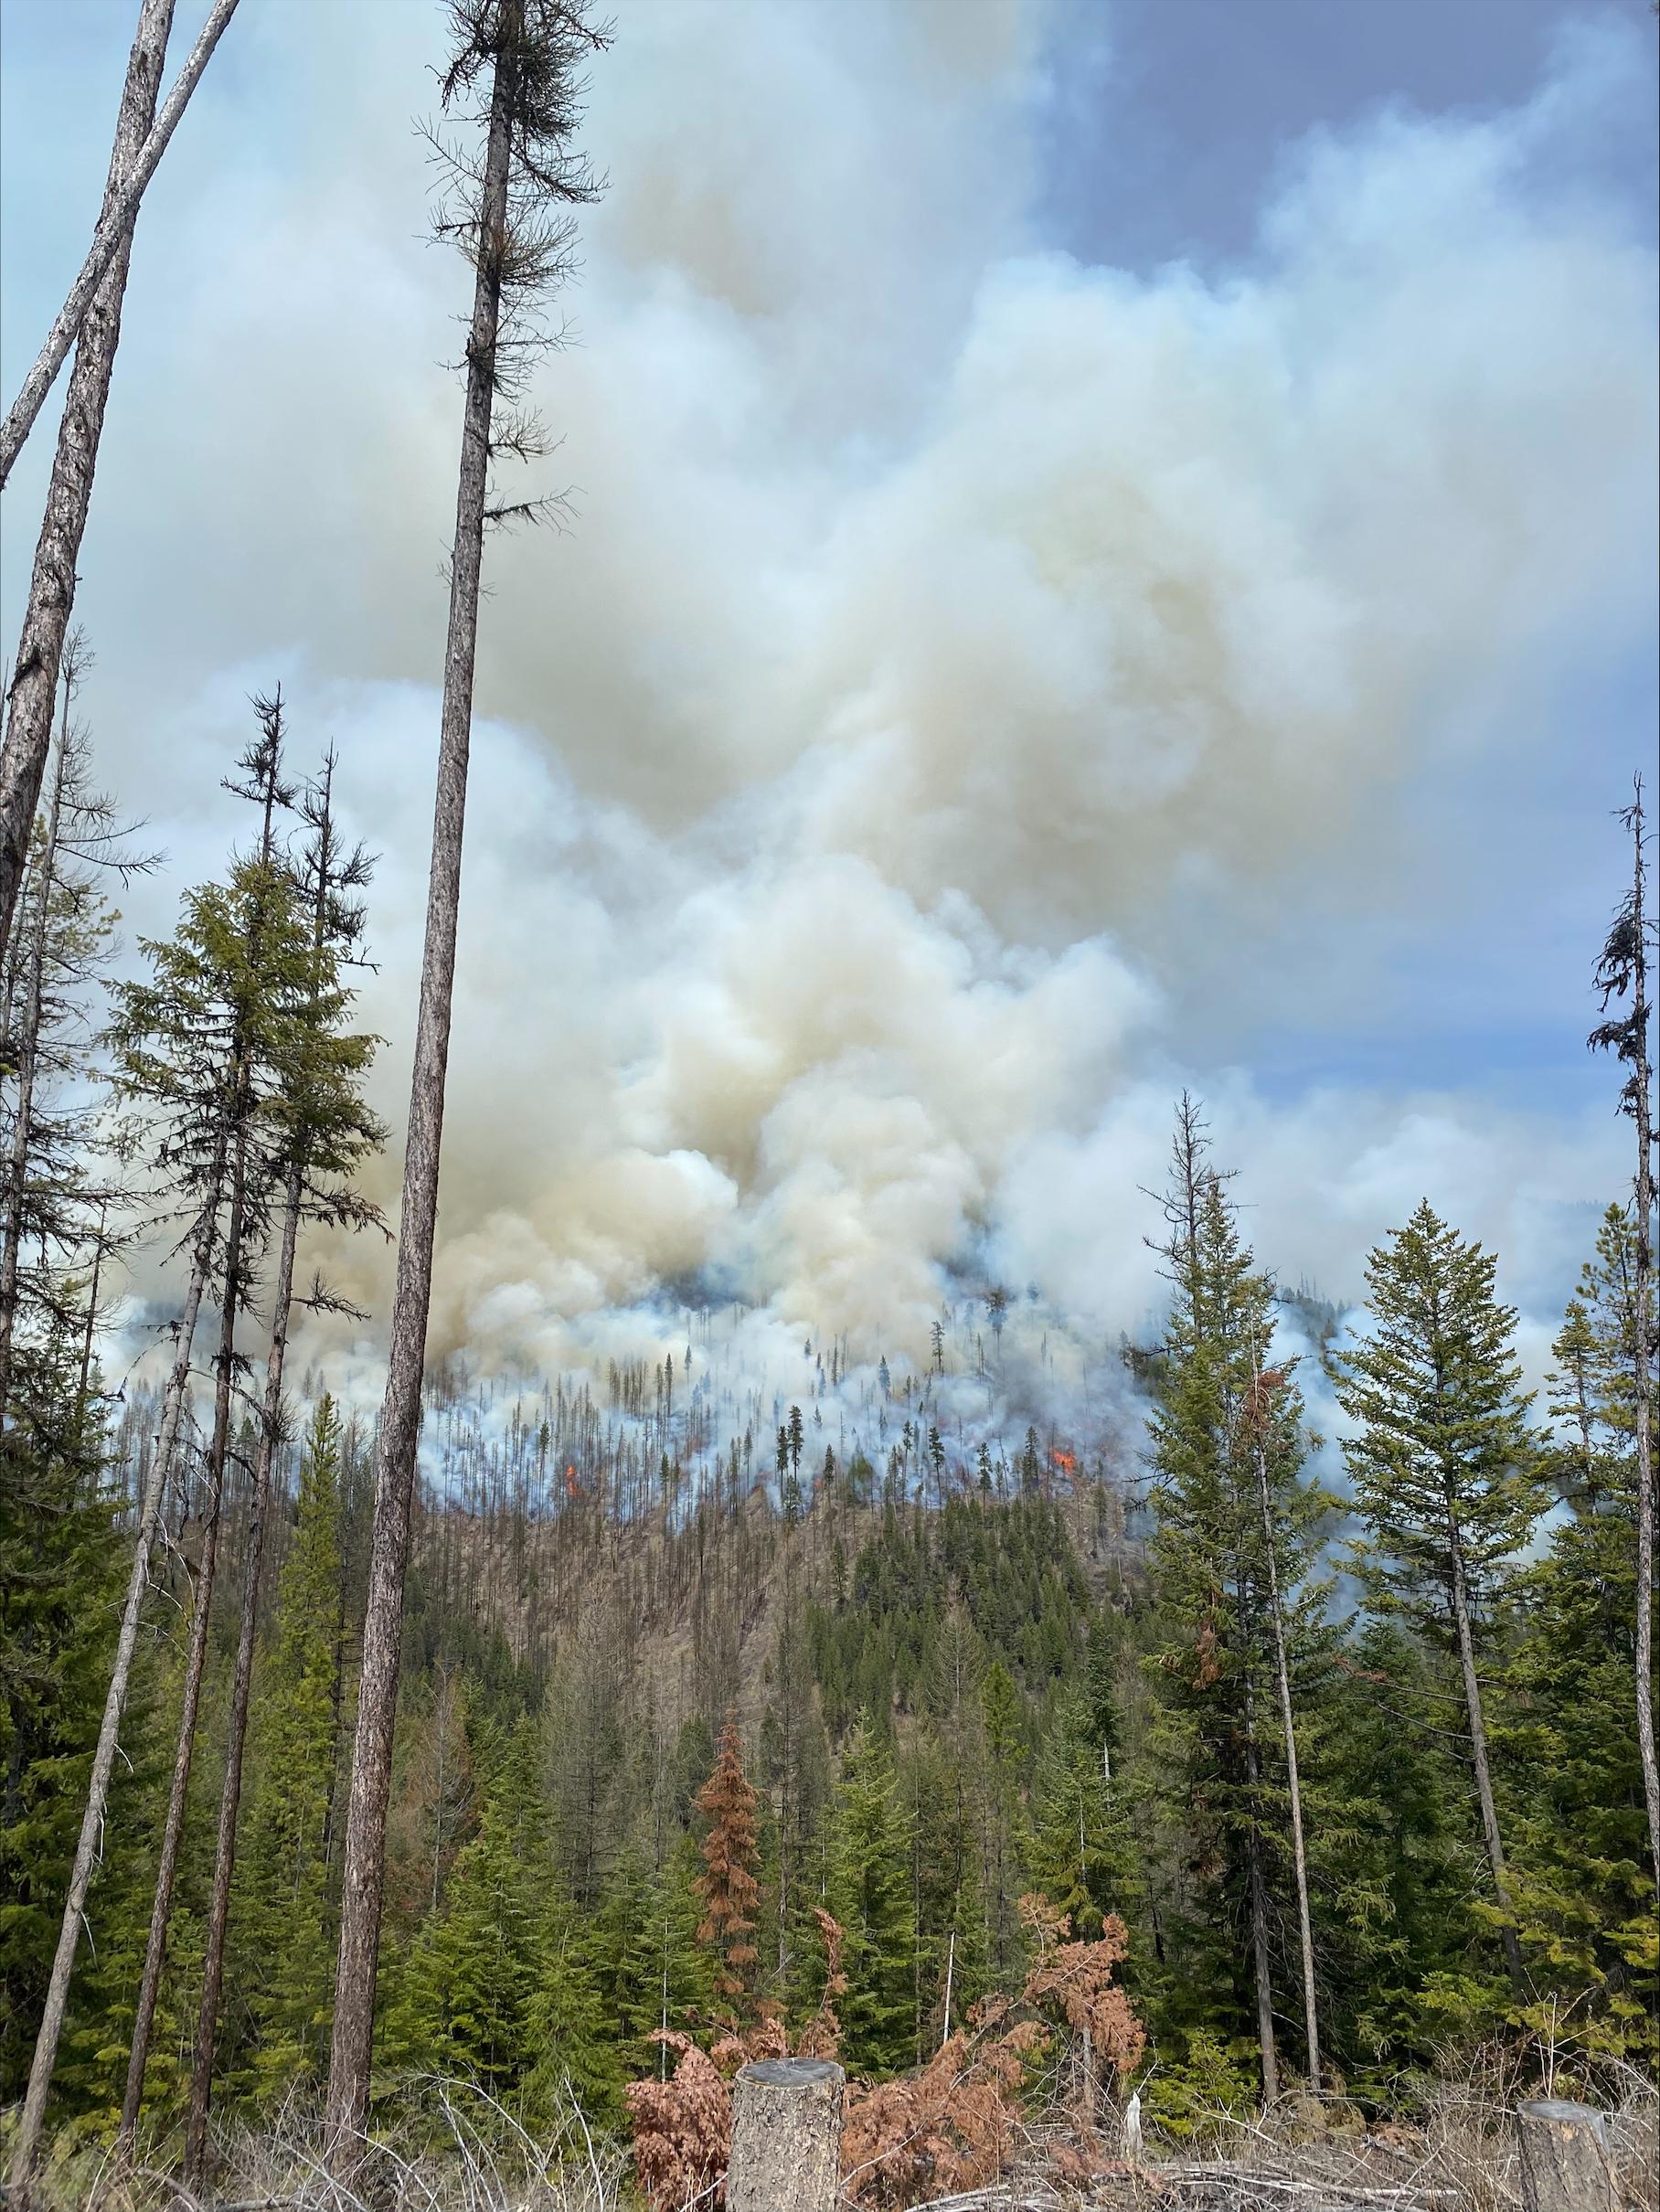 White smoke column from a prescribed fire in a conifer forest 